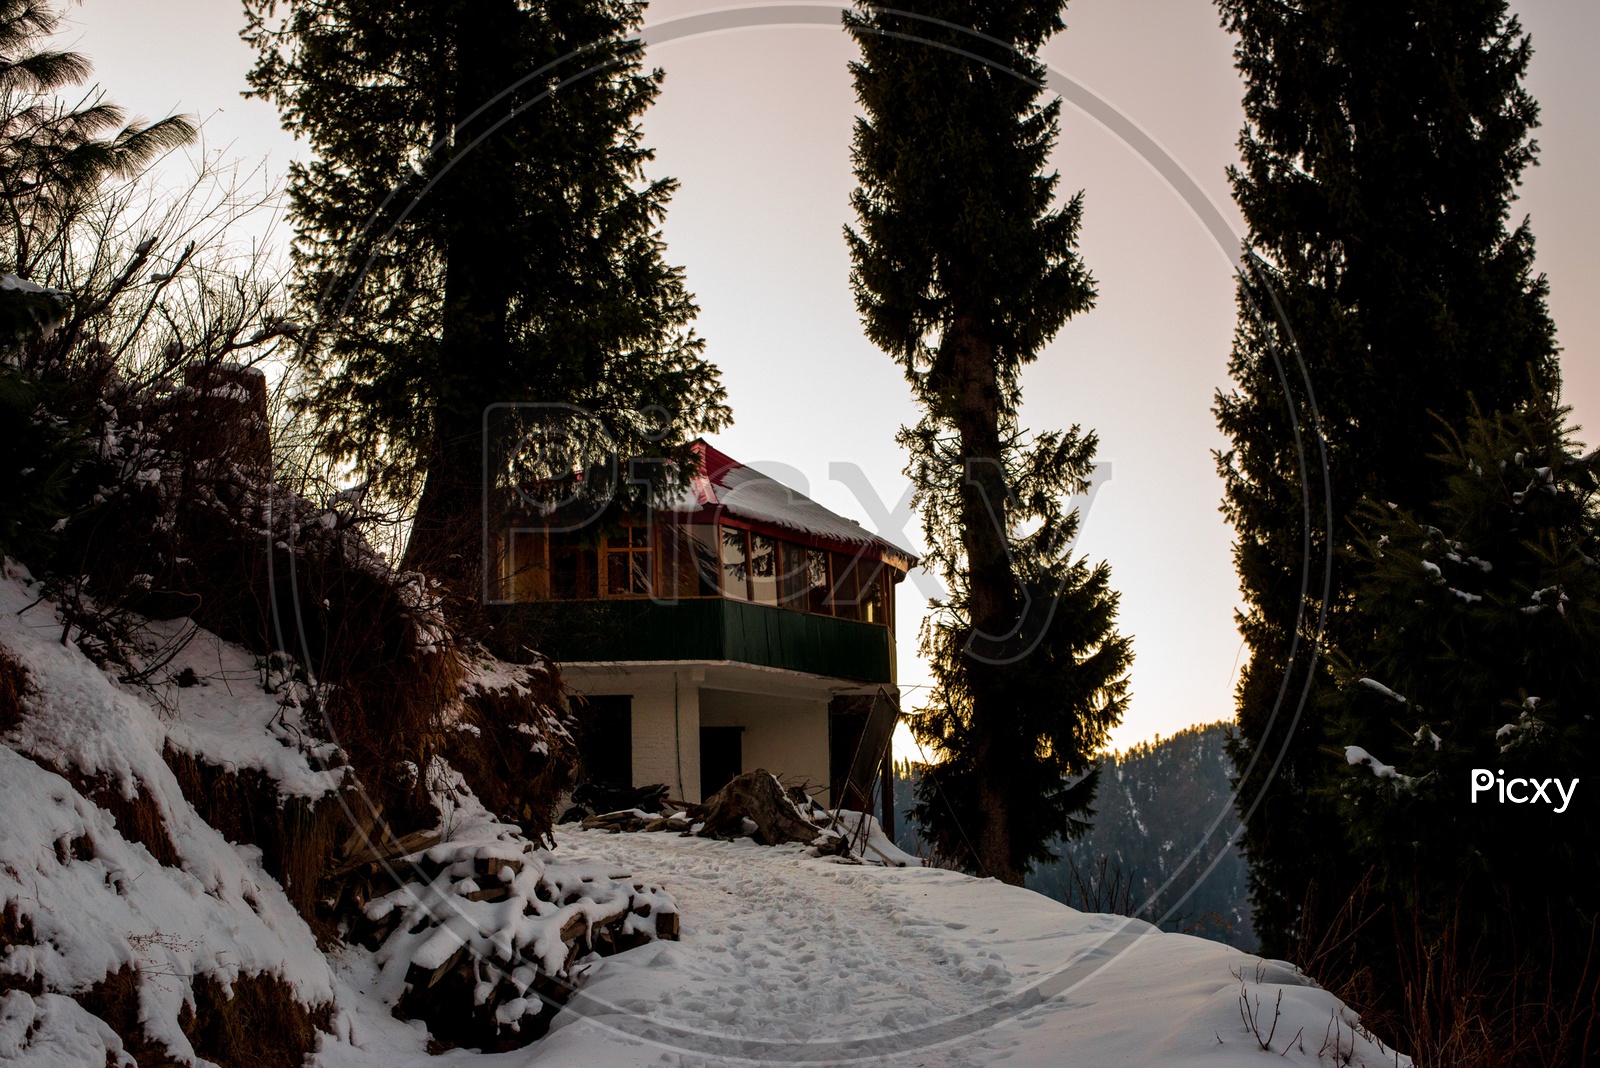 A Wooden house in the Manali during snow